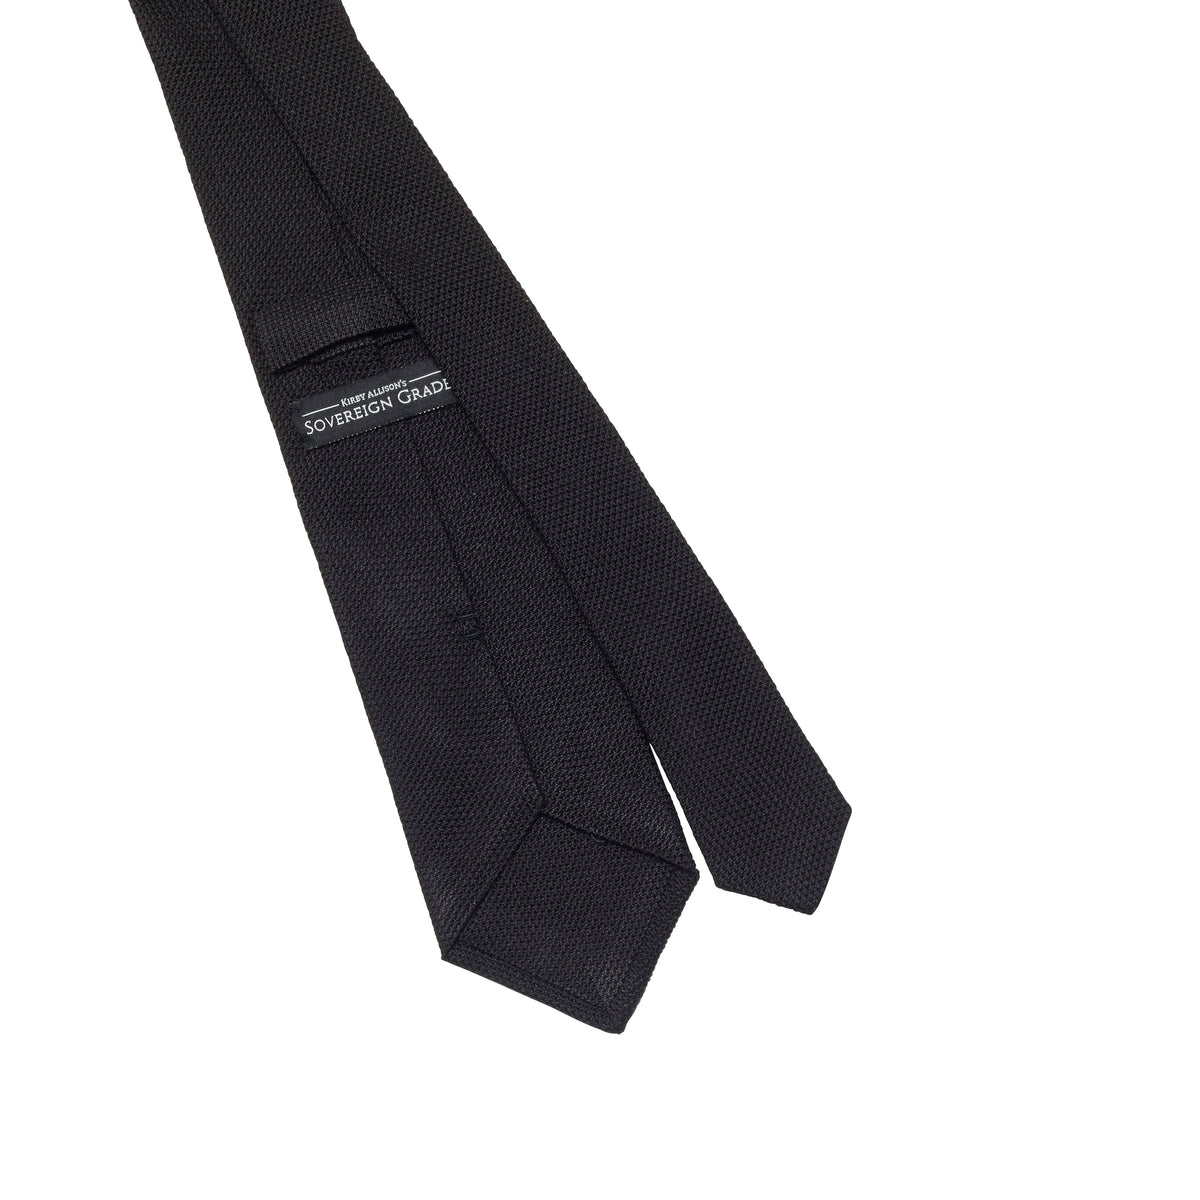 A Sovereign Grade Black Grenadine Fina Tie by KirbyAllison.com on a white background in the United Kingdom.